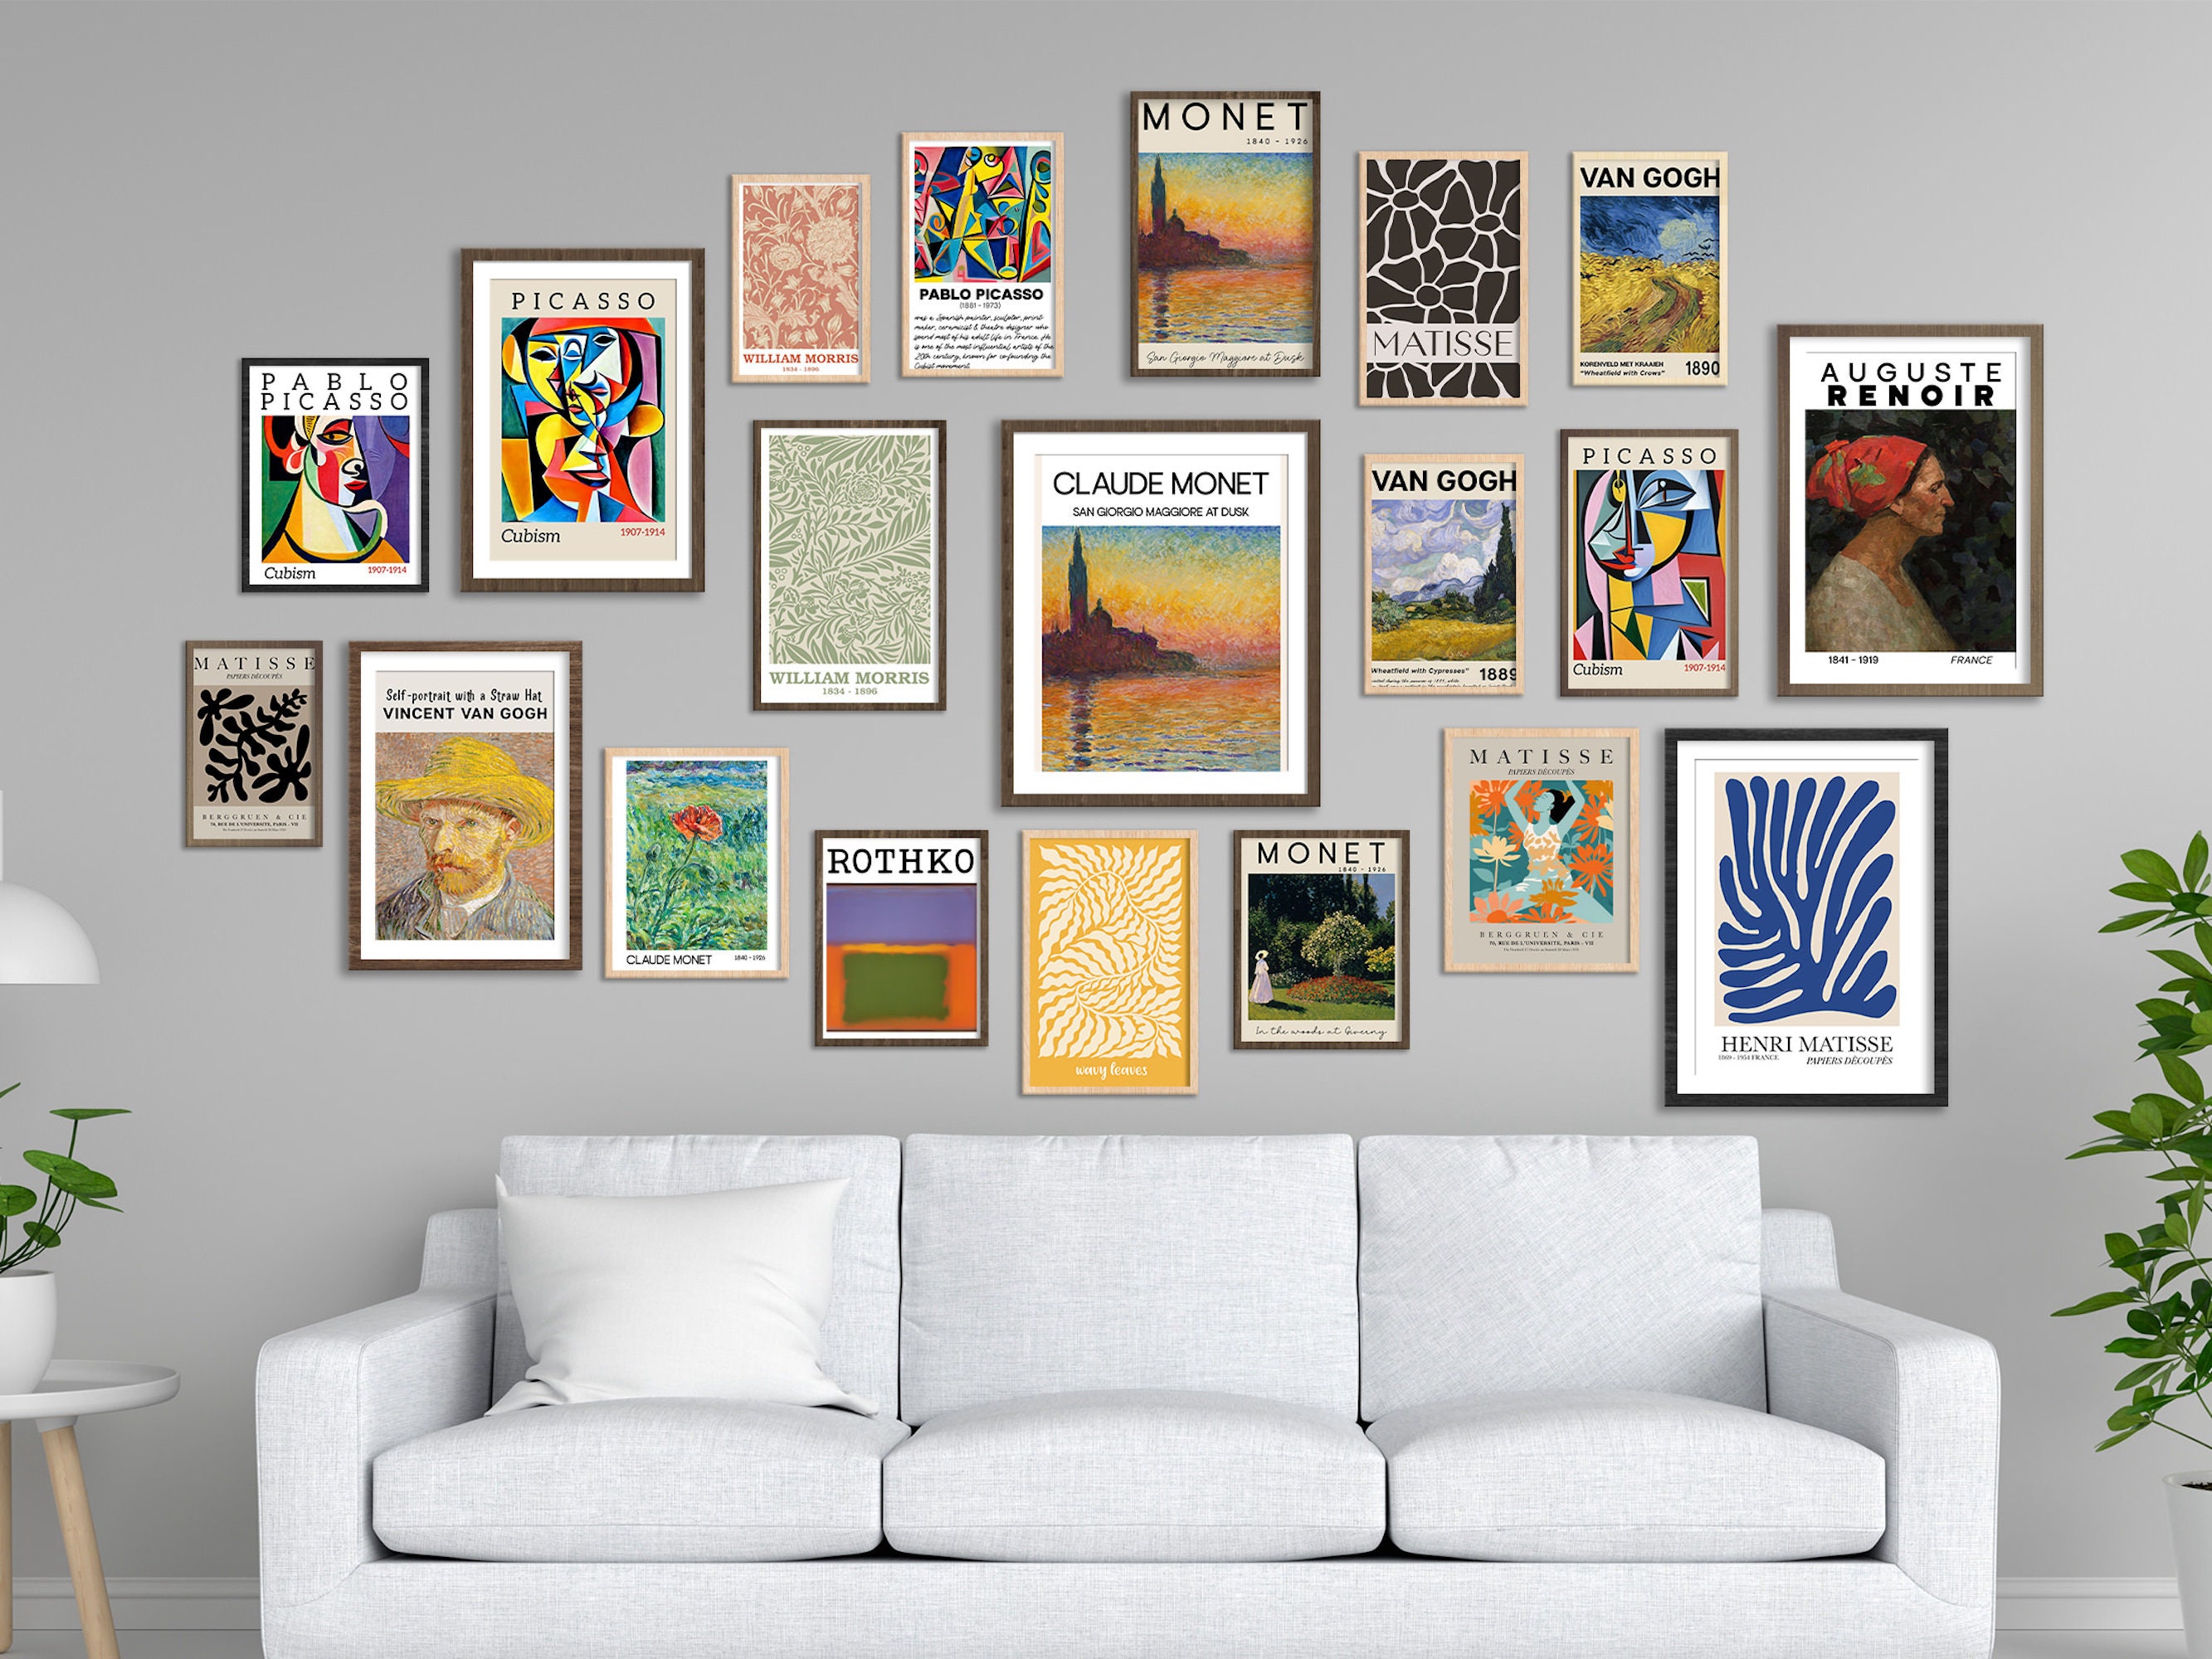 Maximalist Gallery MEGA Printable Set Home Airbnb Eclectic Eclectic 375 - Wall Wall Prints, Collage, Wall Wall Etsy Gallery Art Decor, BUNDLE Art,